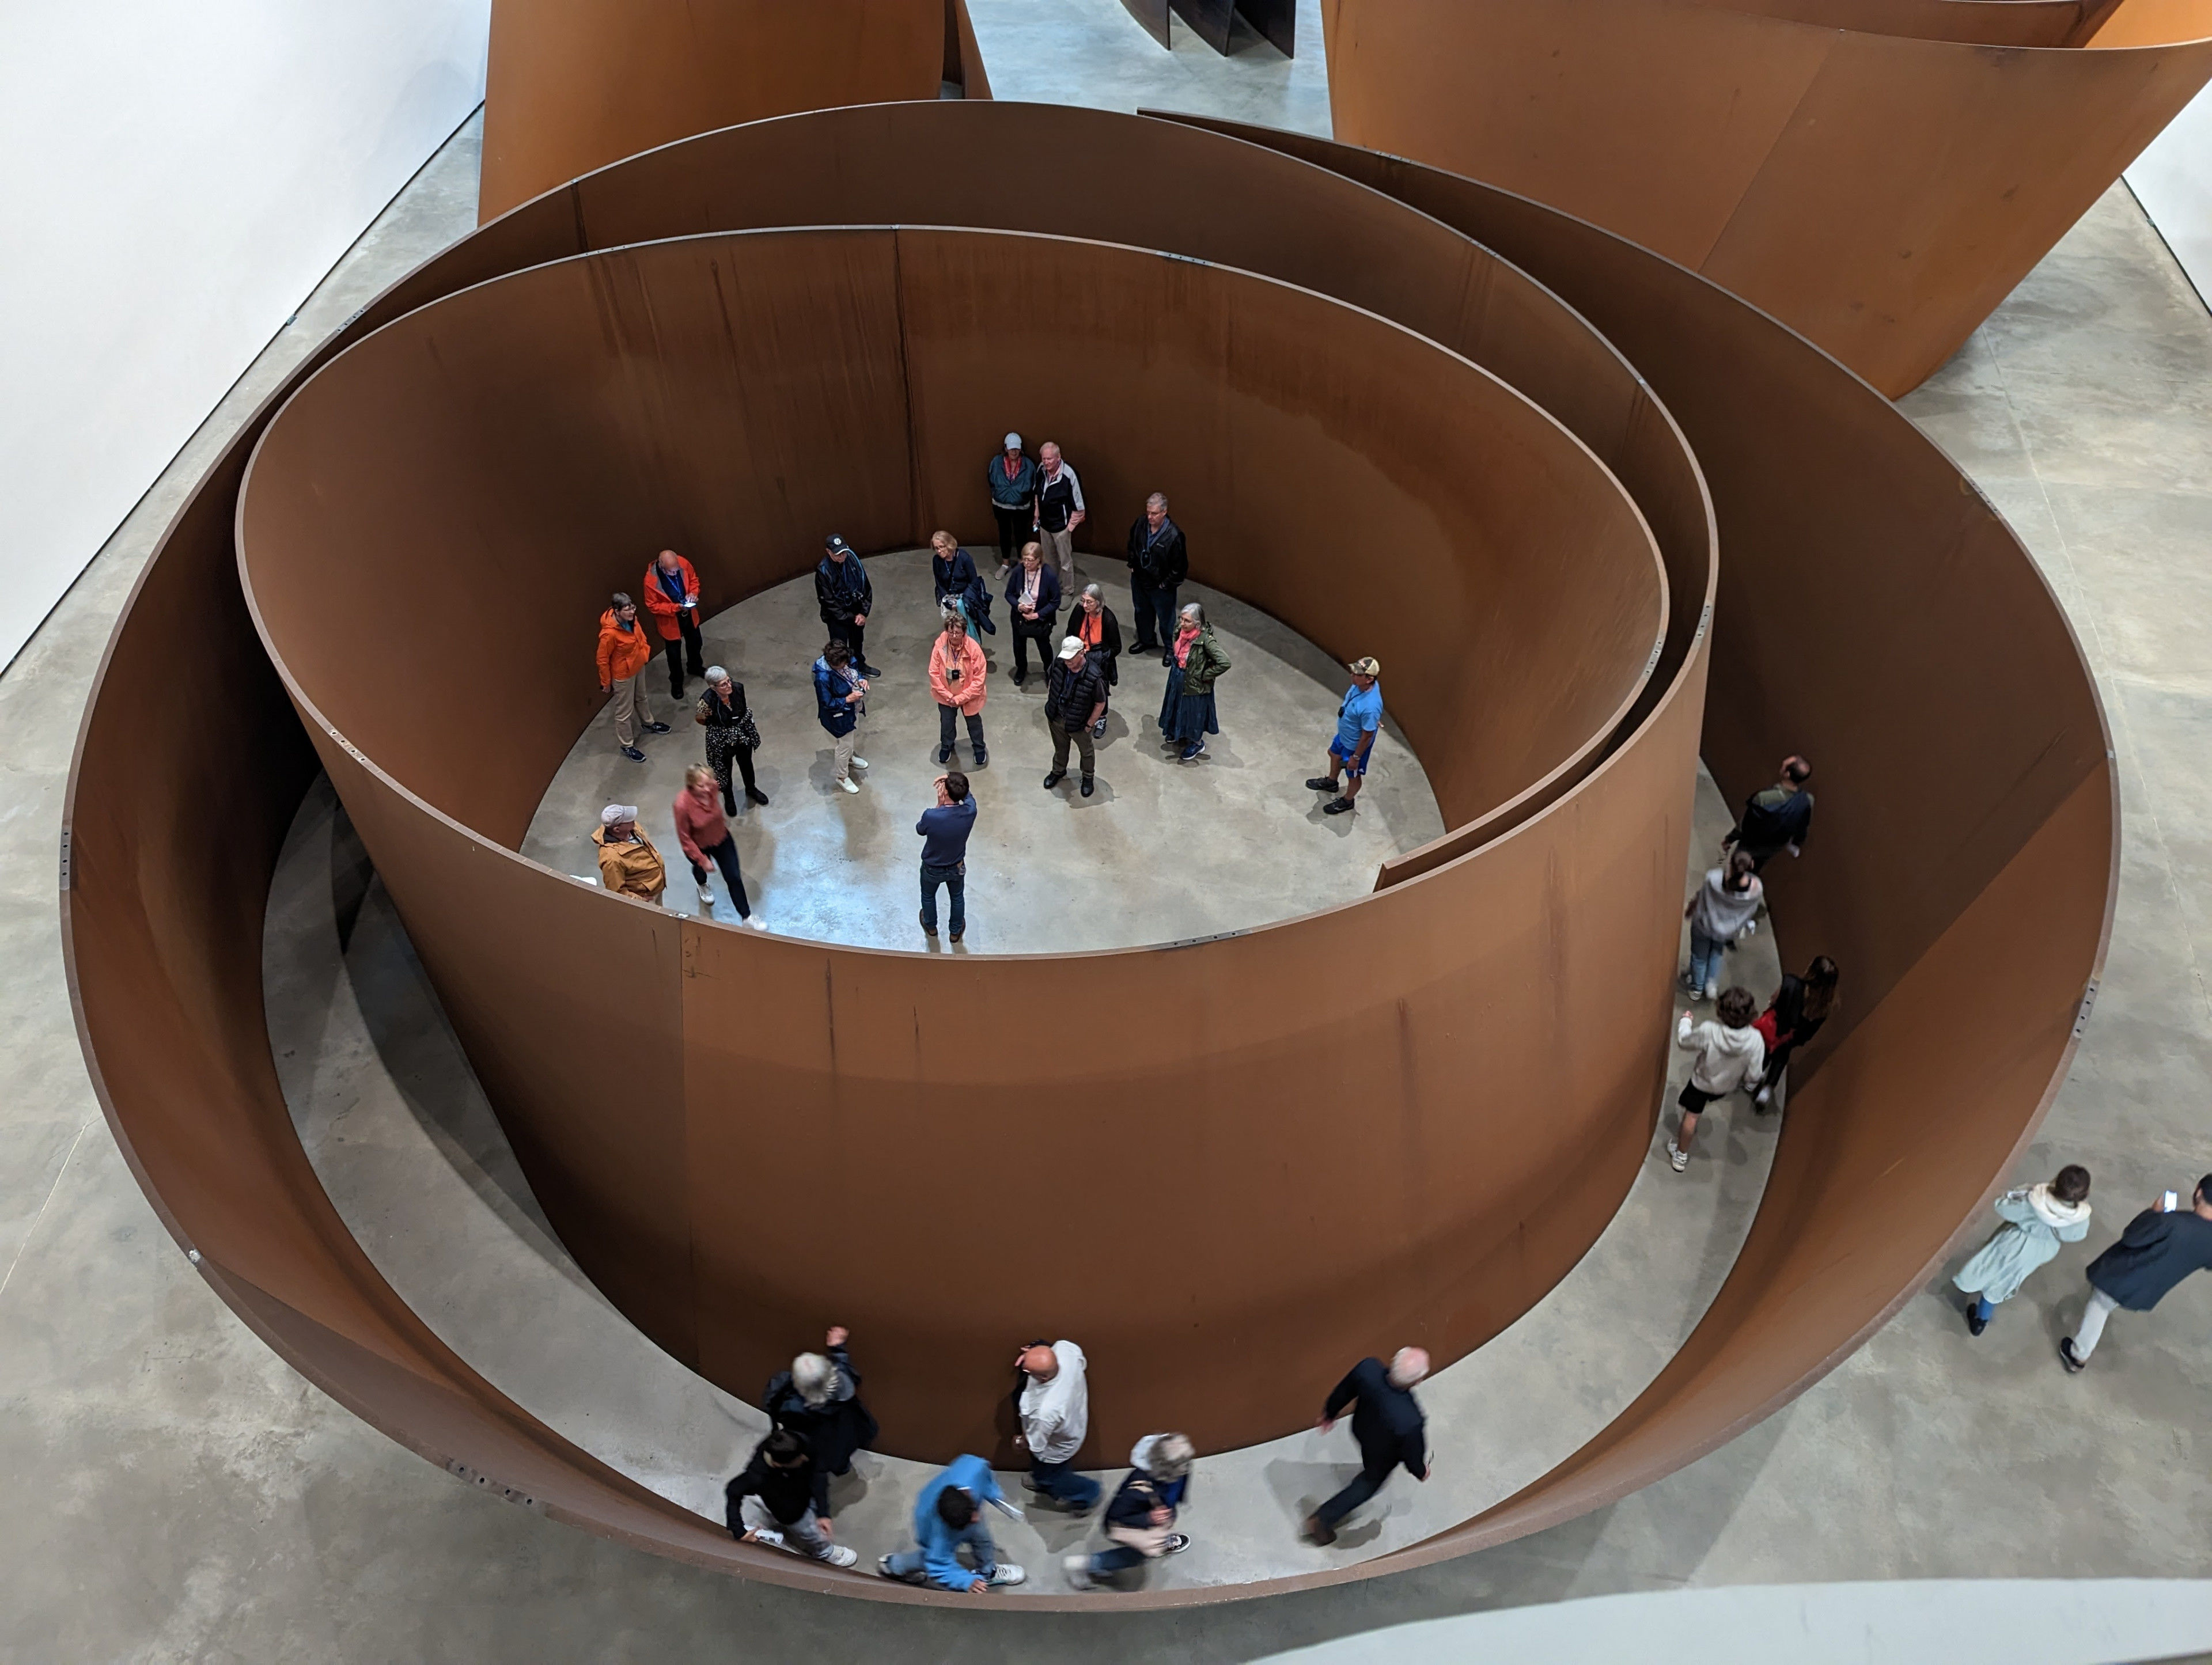 A fine example of a contemporary minimalistic installation by Richard Serra, The Matter of Time, 2005, Guggenheim Bilbao